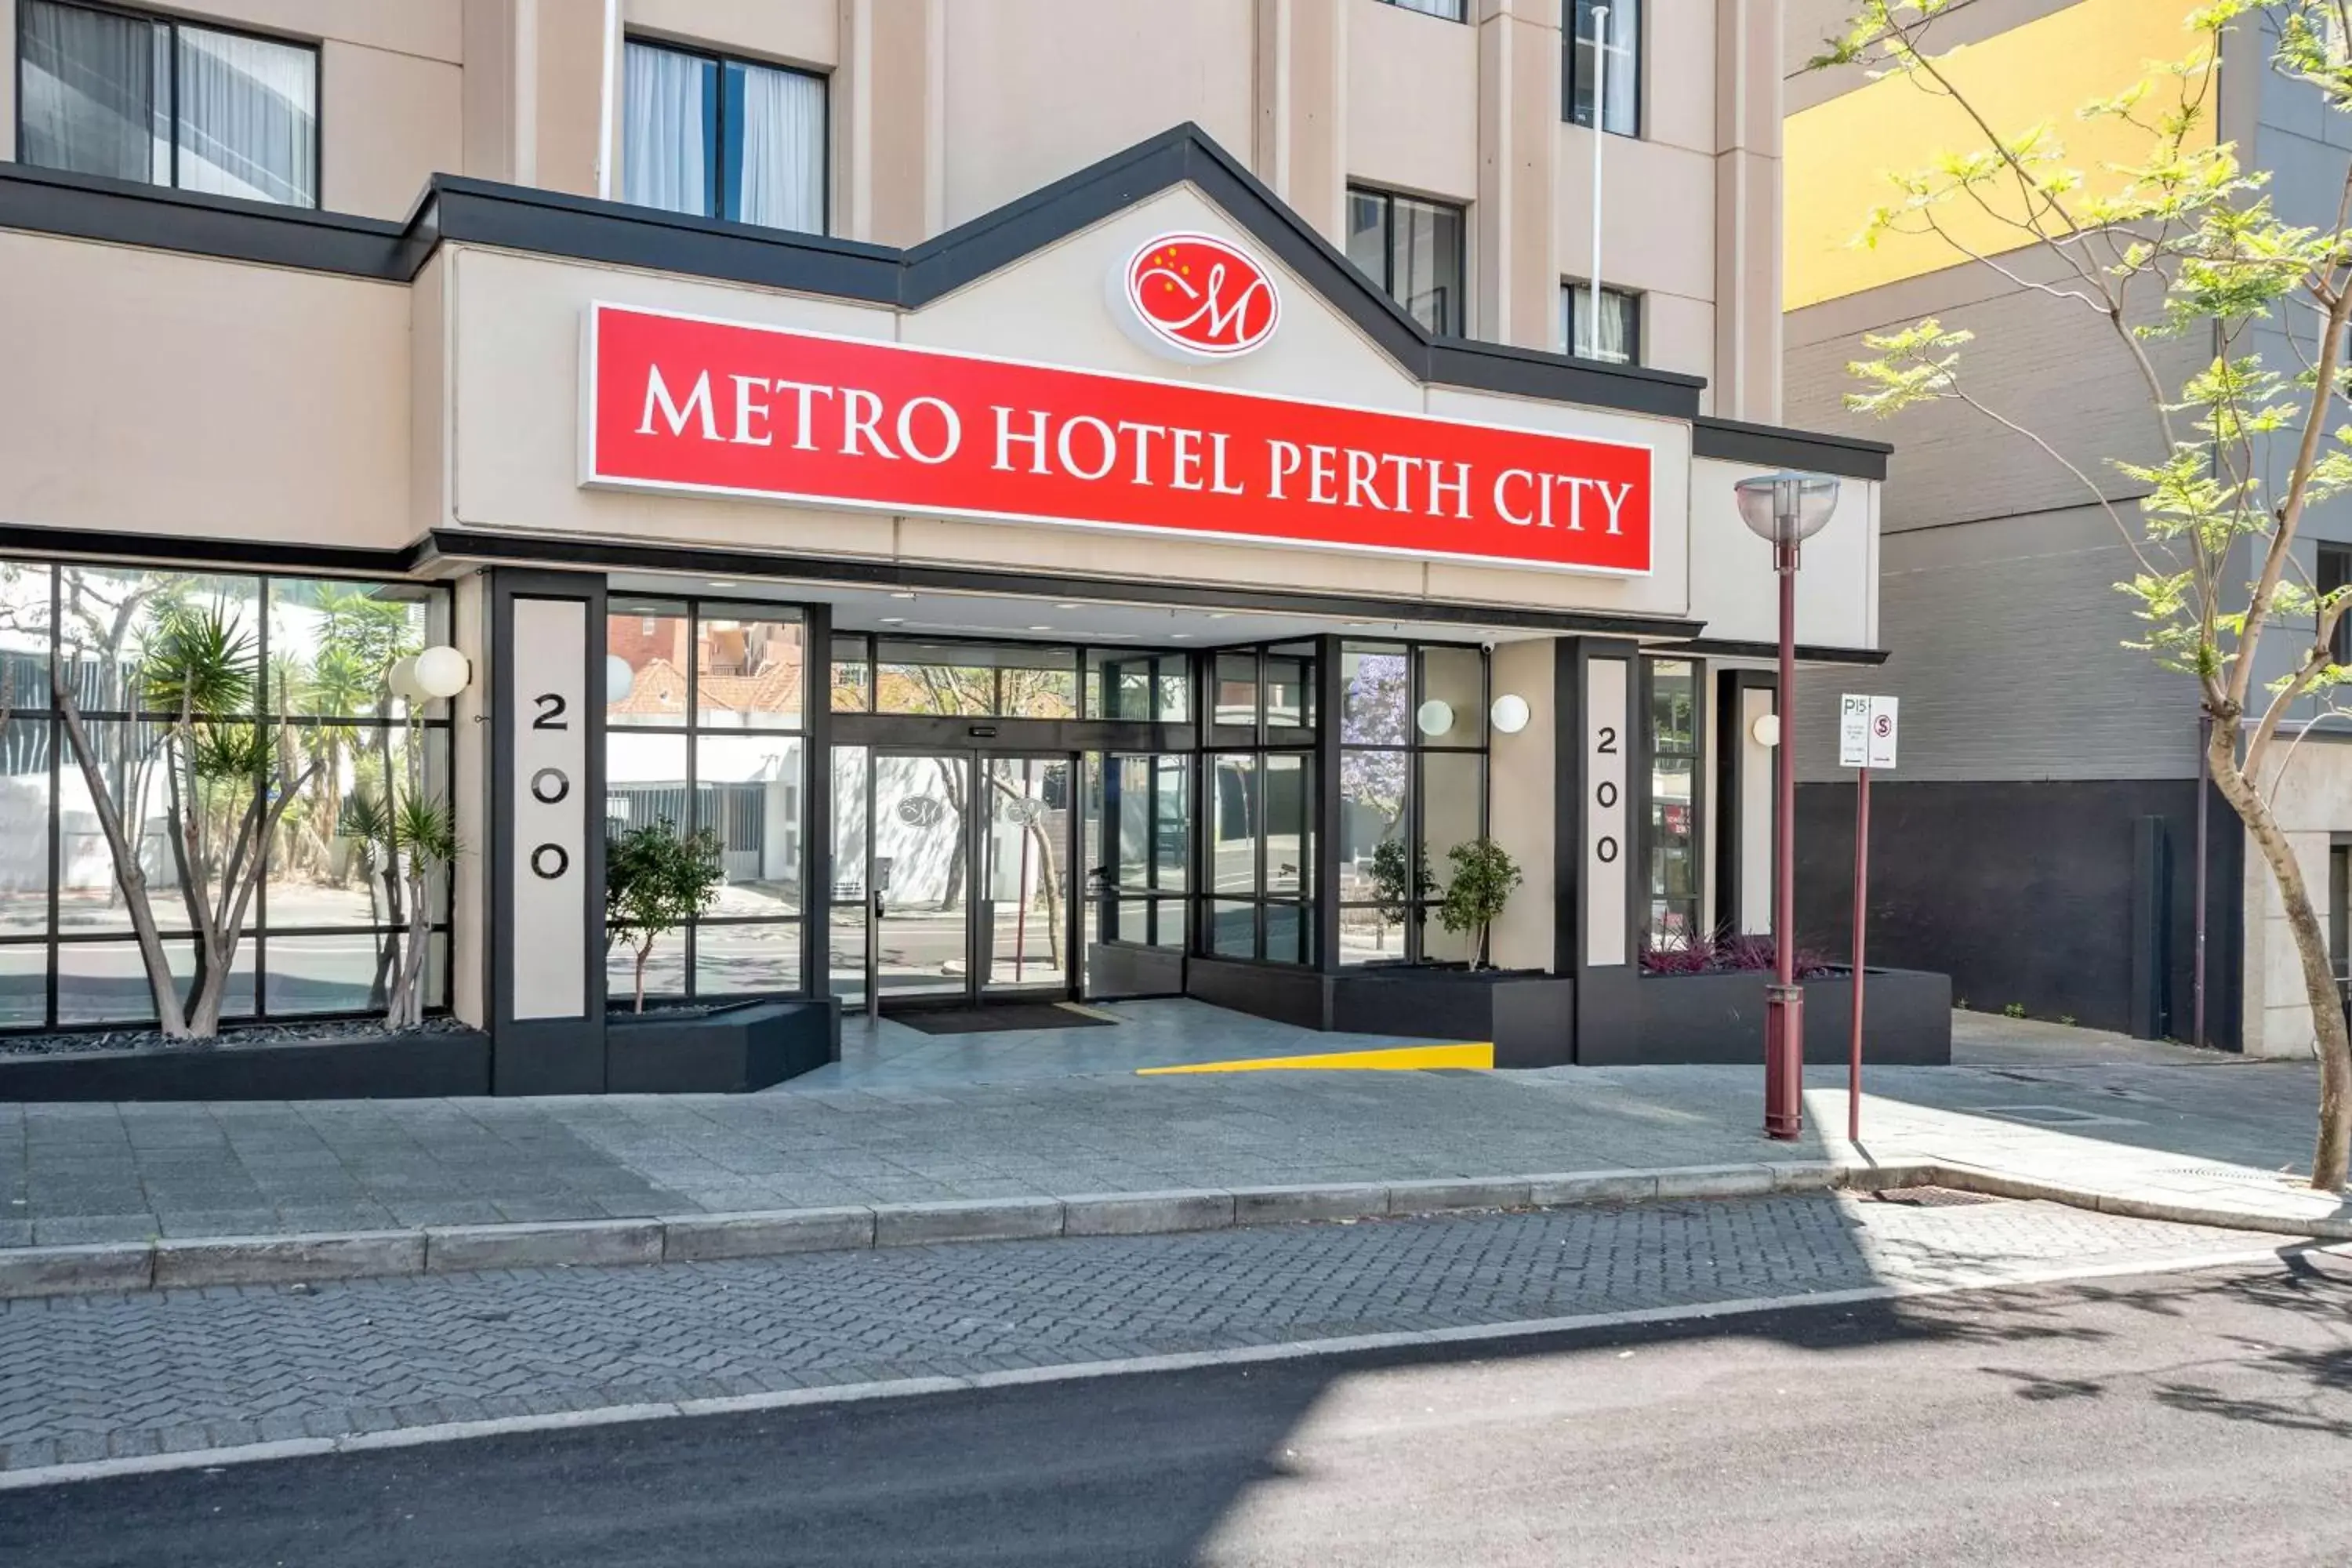 Property building in Metro Hotel Perth City